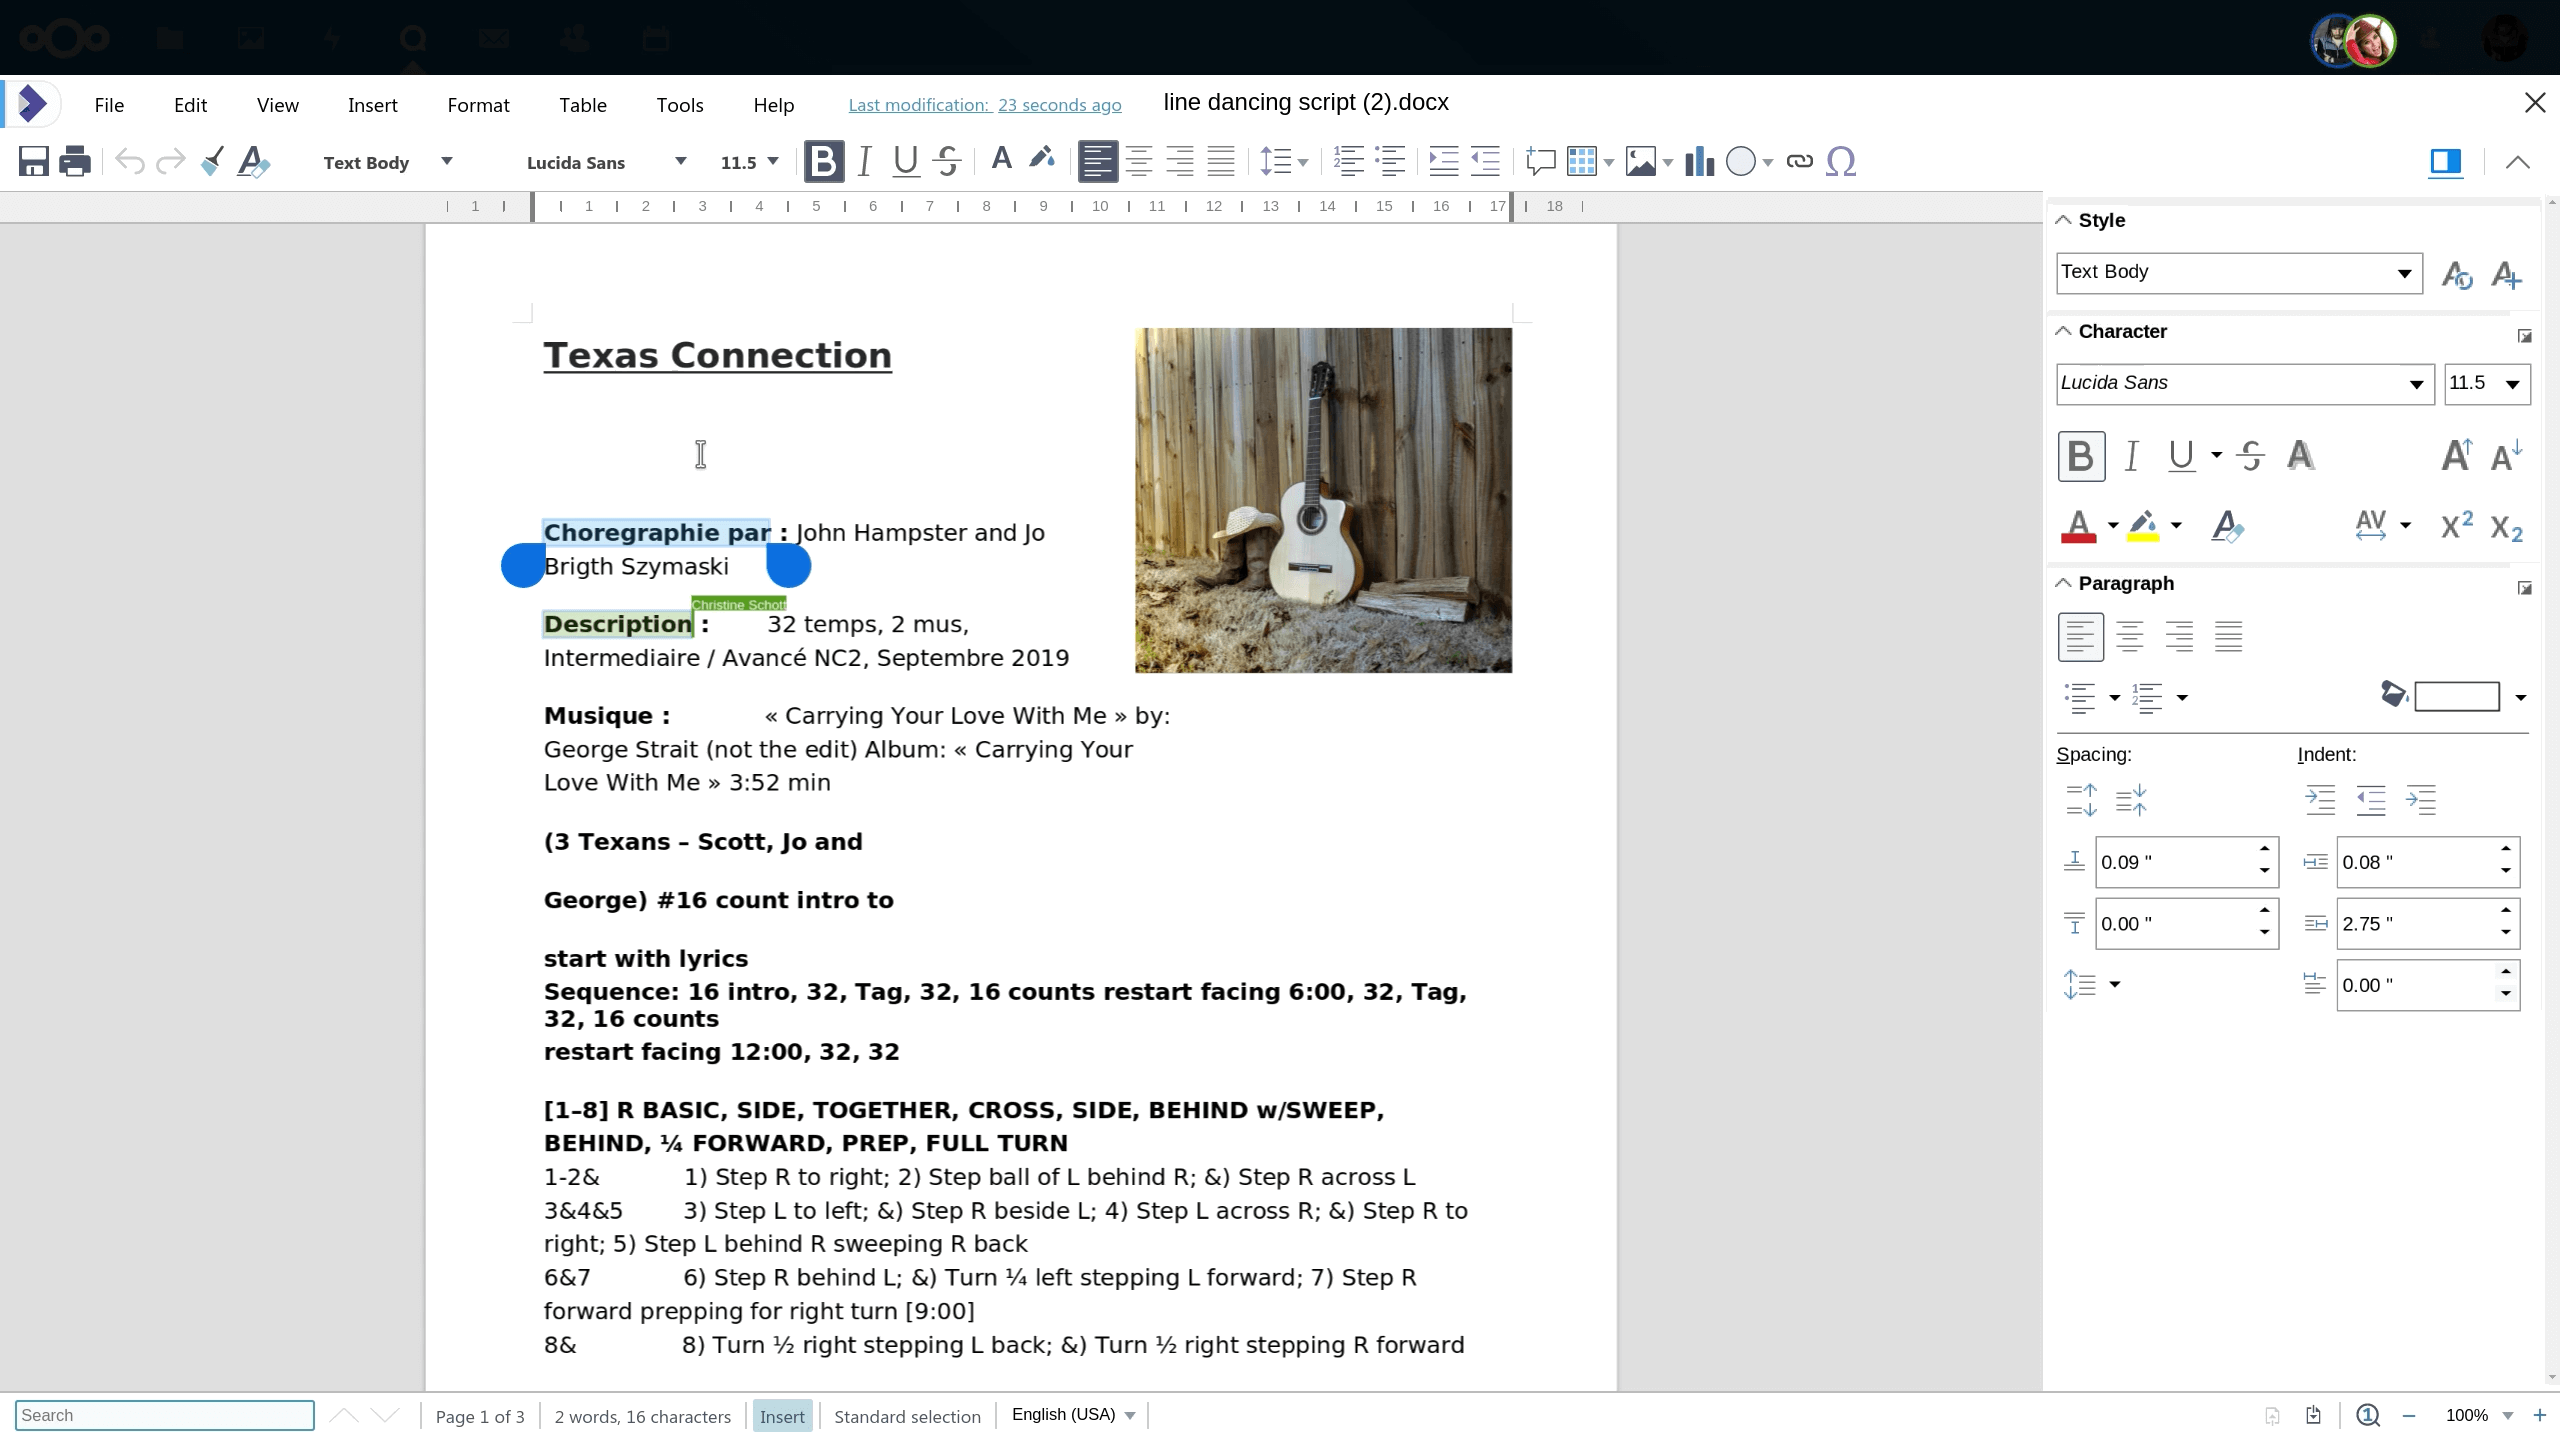 Editing a document during a call